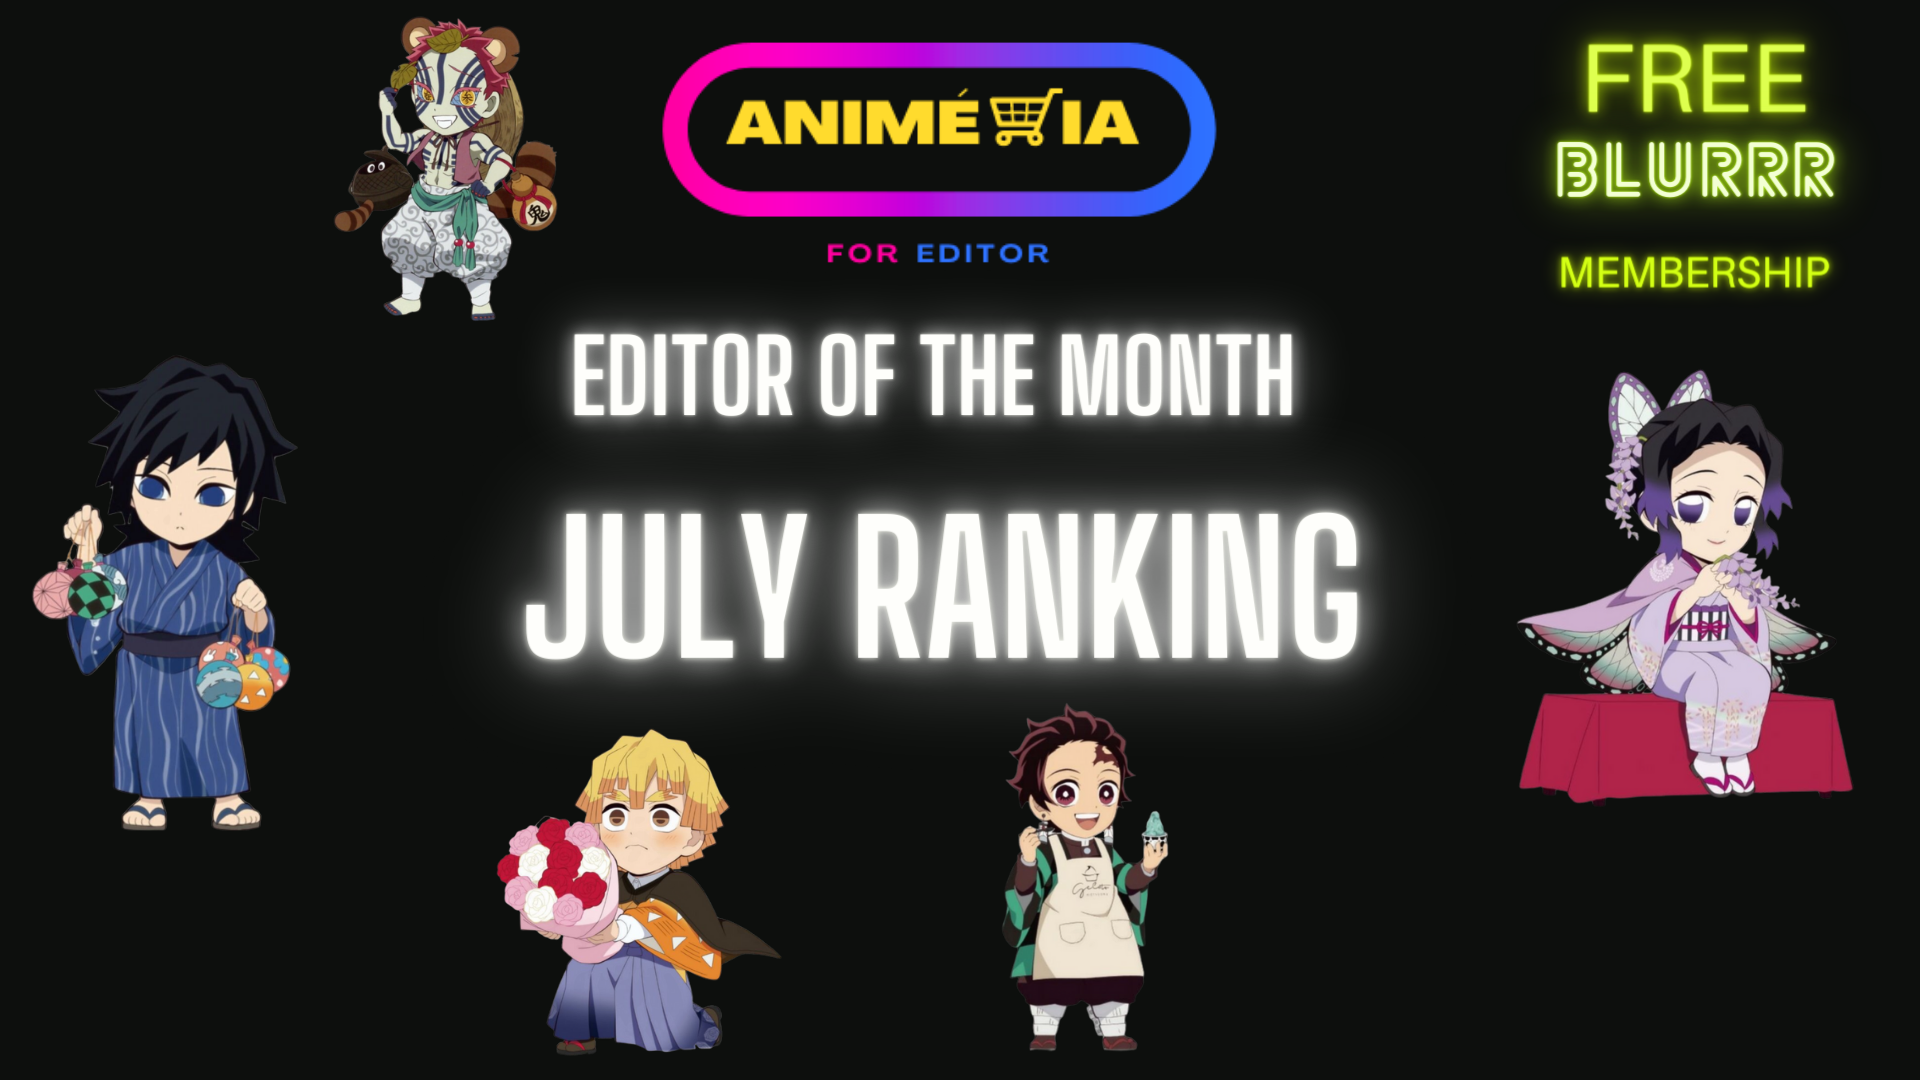 July Ranking “Editor of The Month”